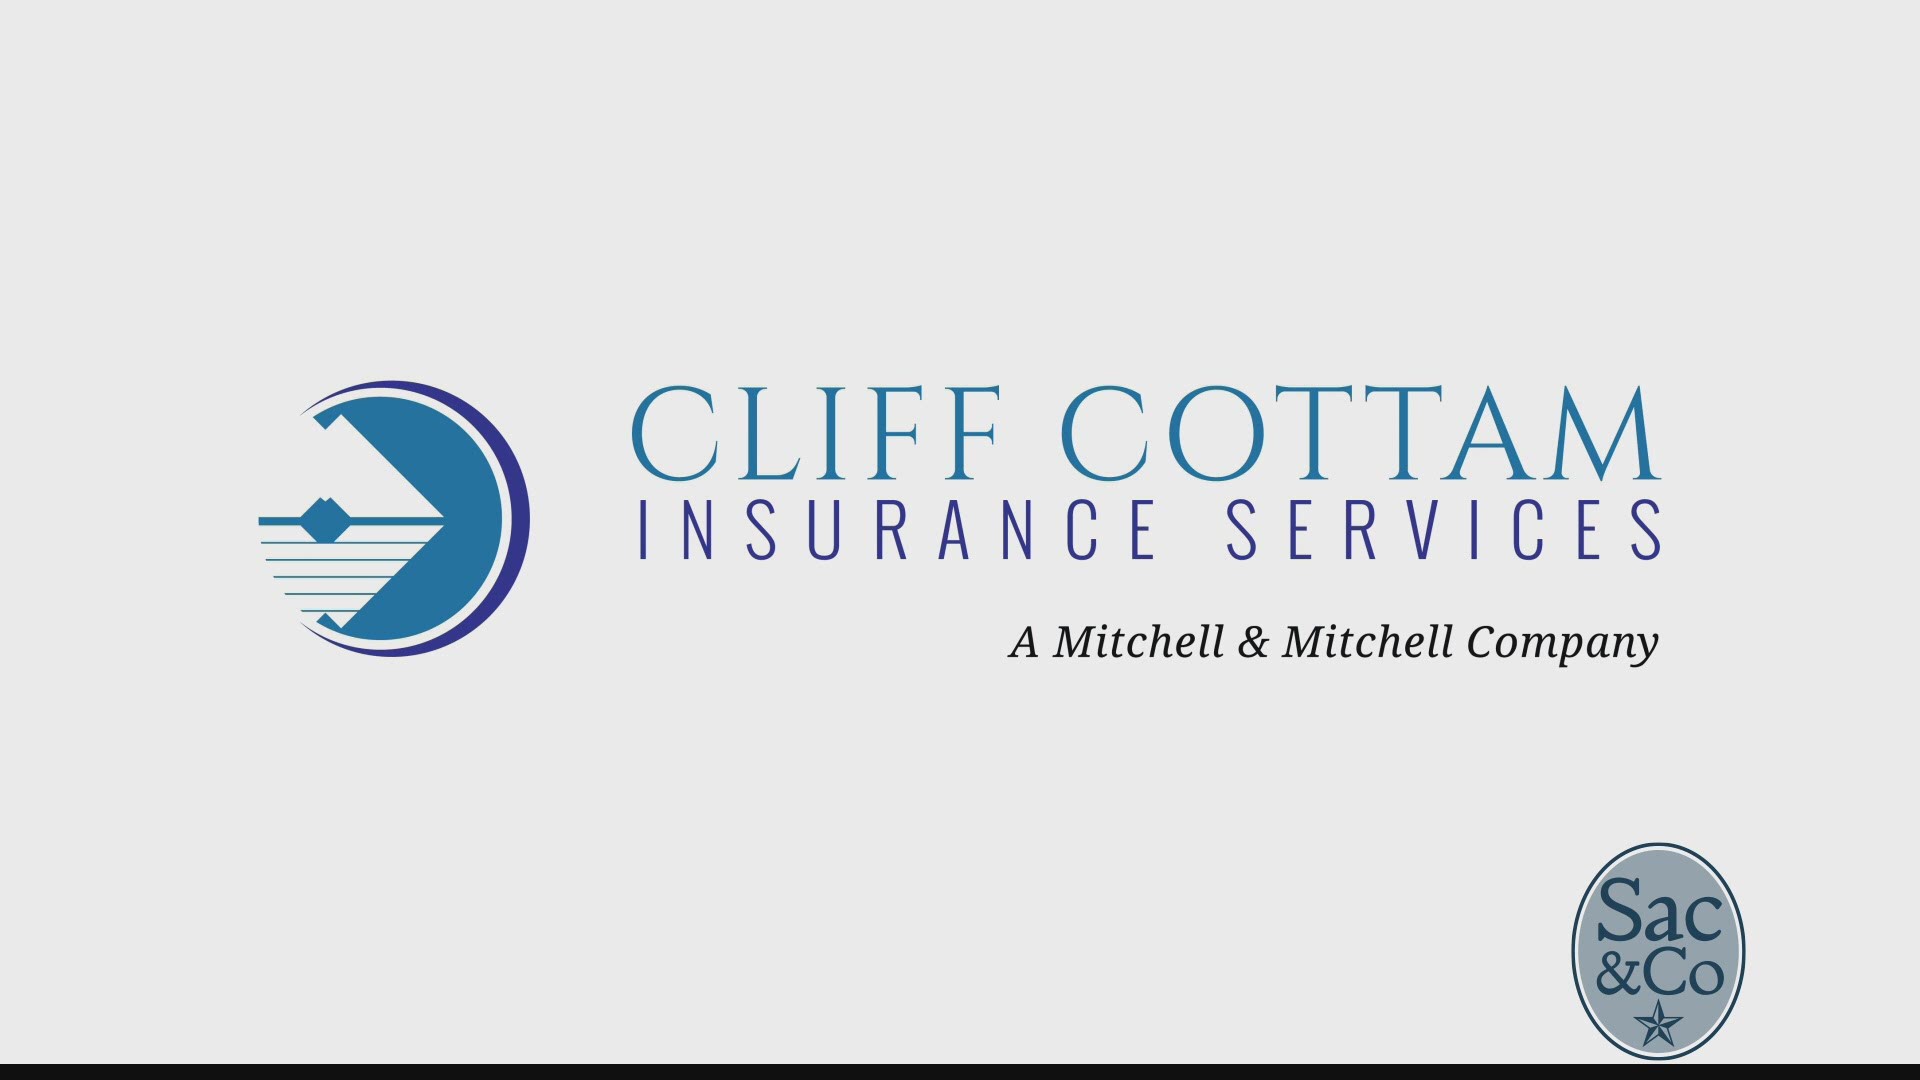 Cliff Cottam Insurance Services has got you covered when it comes to insuring your summer toys this season. From RV's to Motorcycles and more!